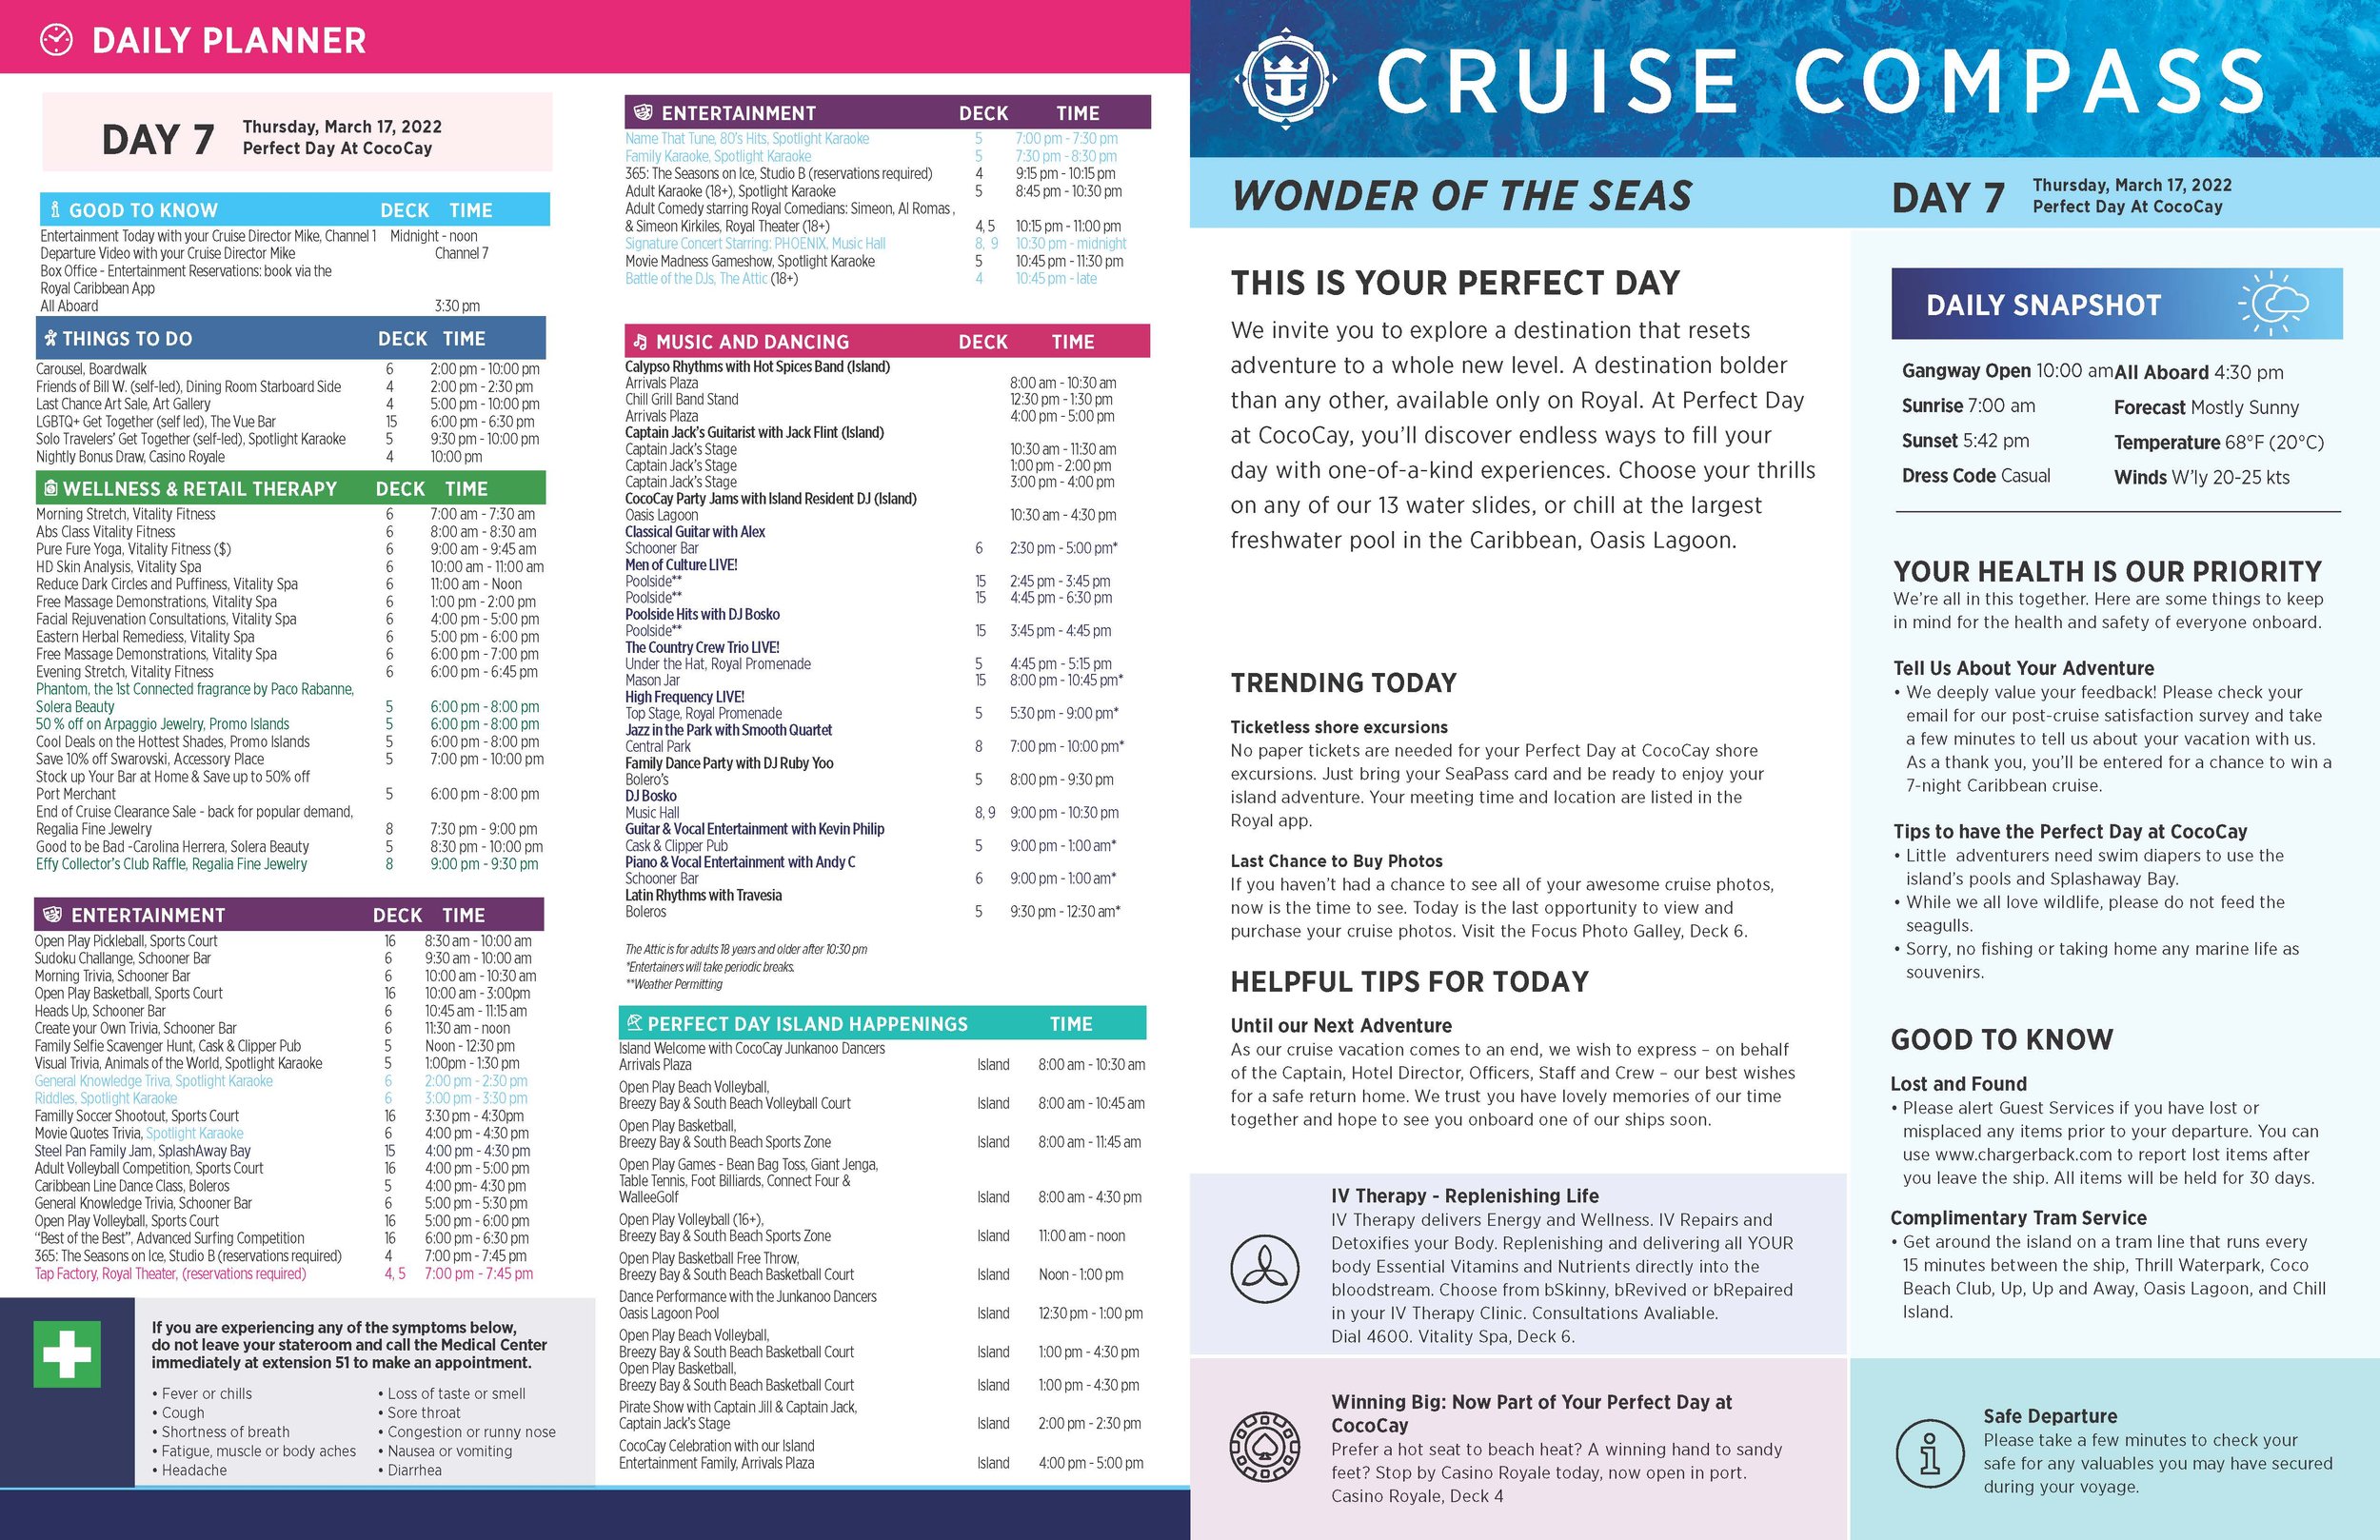 Cruise Compass - Day 7 - Thursday, March 17. 2022,  Perfect Day at CocoCay, The Bahamas_Page_1.jpg